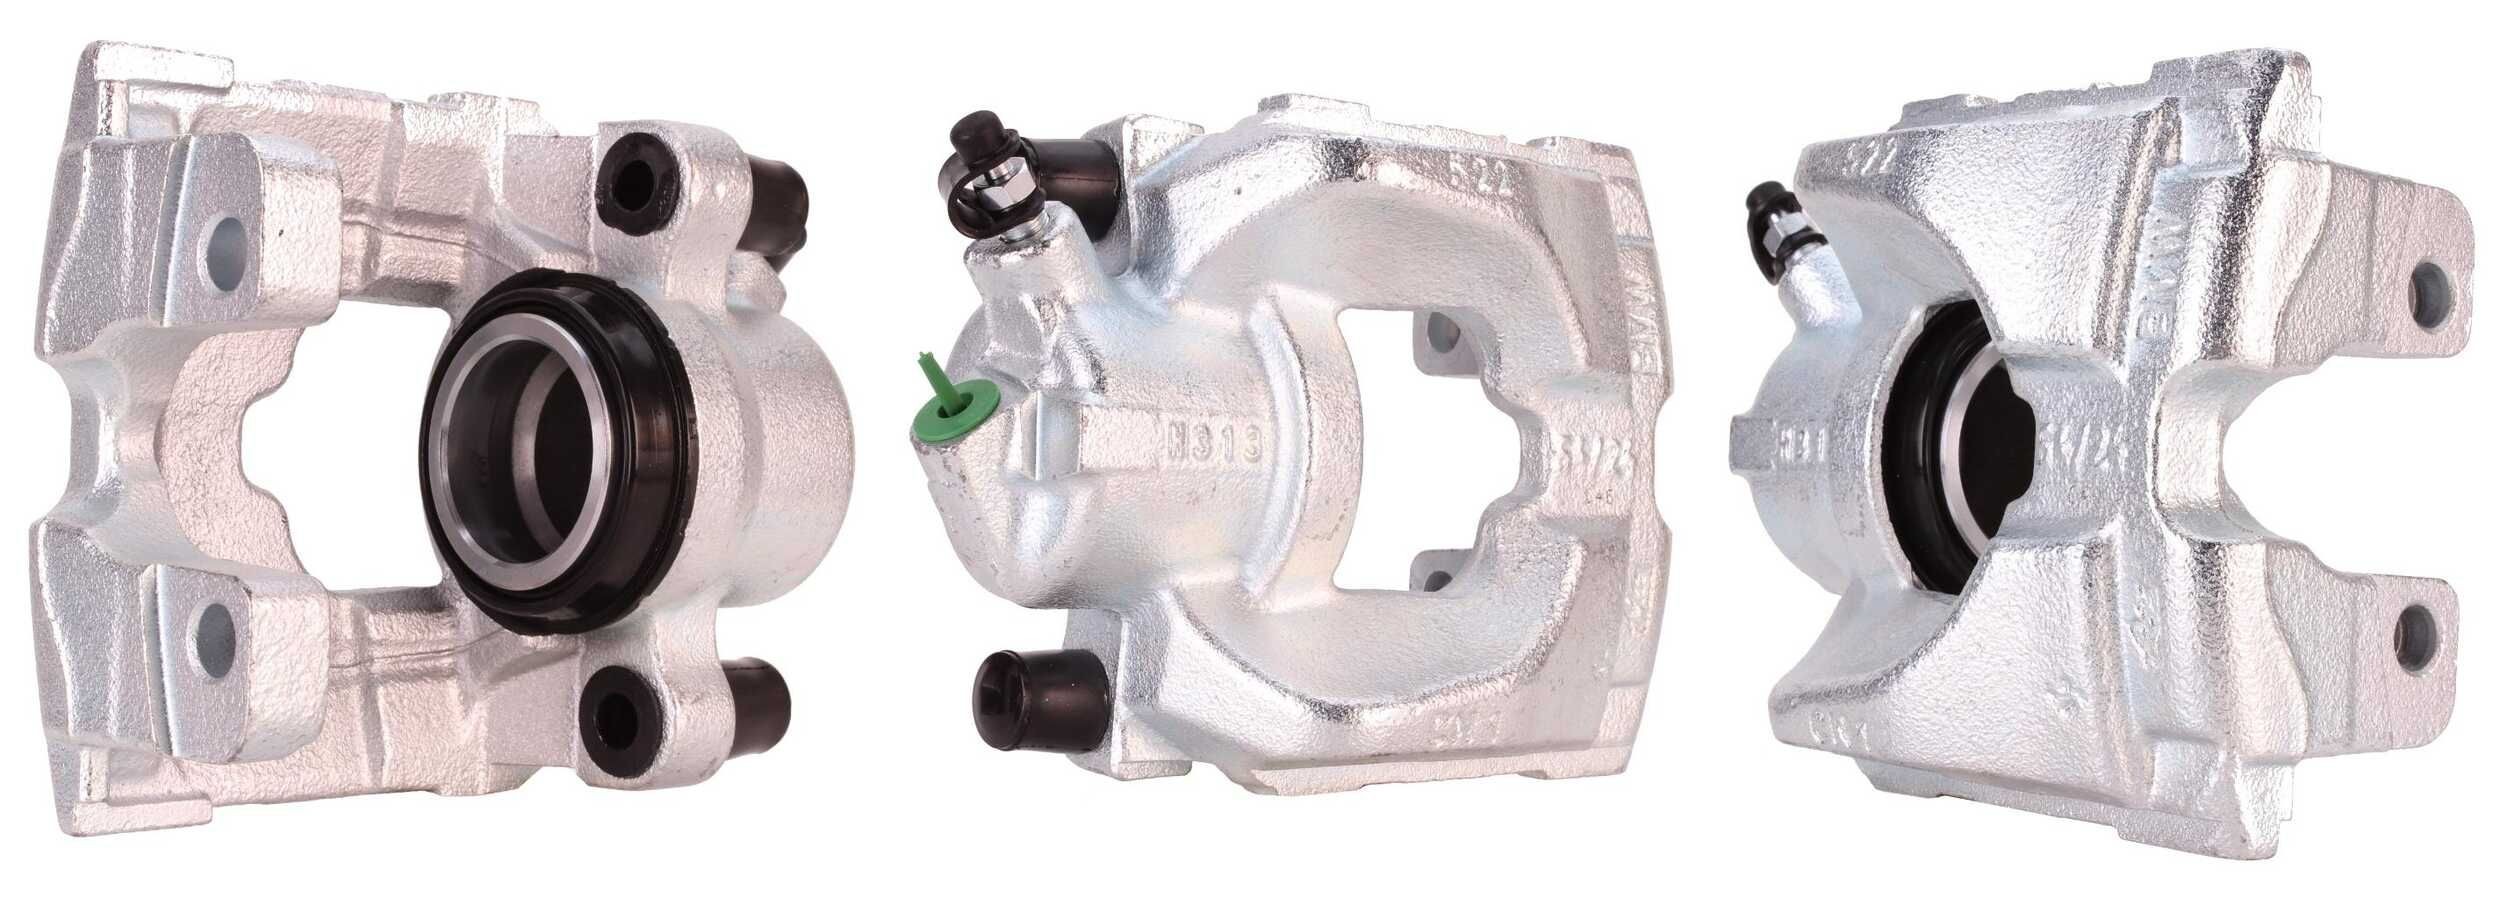 ELSTOCK 83-1657 Brake caliper Cast Iron, Front Axle Right, behind the axle